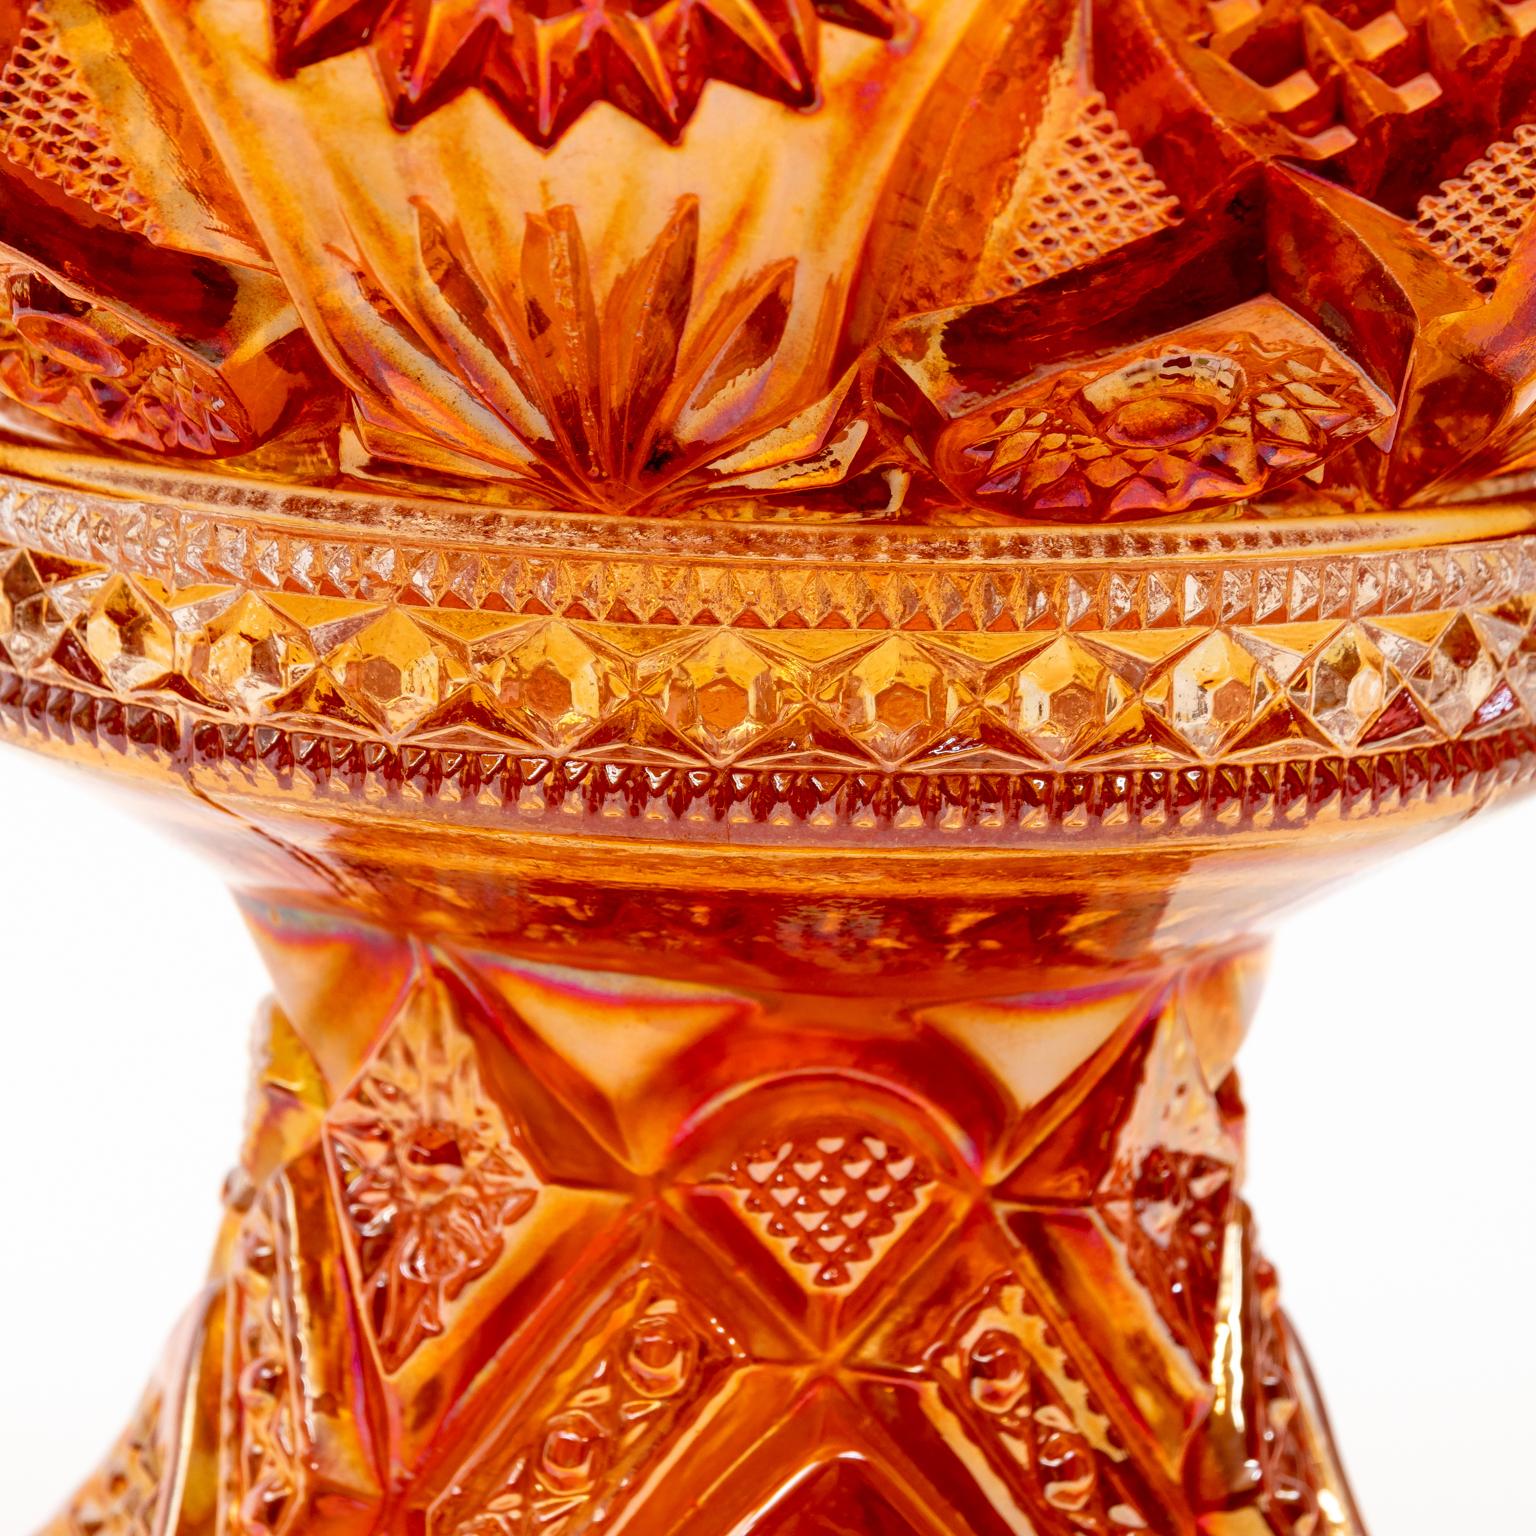 Circa 1960s vintage Imperial glass punch bowl in vibrant marigold color with highly decorated design. Originally made in early 1900s reissued in 1960s. Mint Condition. Never used. Made in the United States. Please note of wear consistent with age.